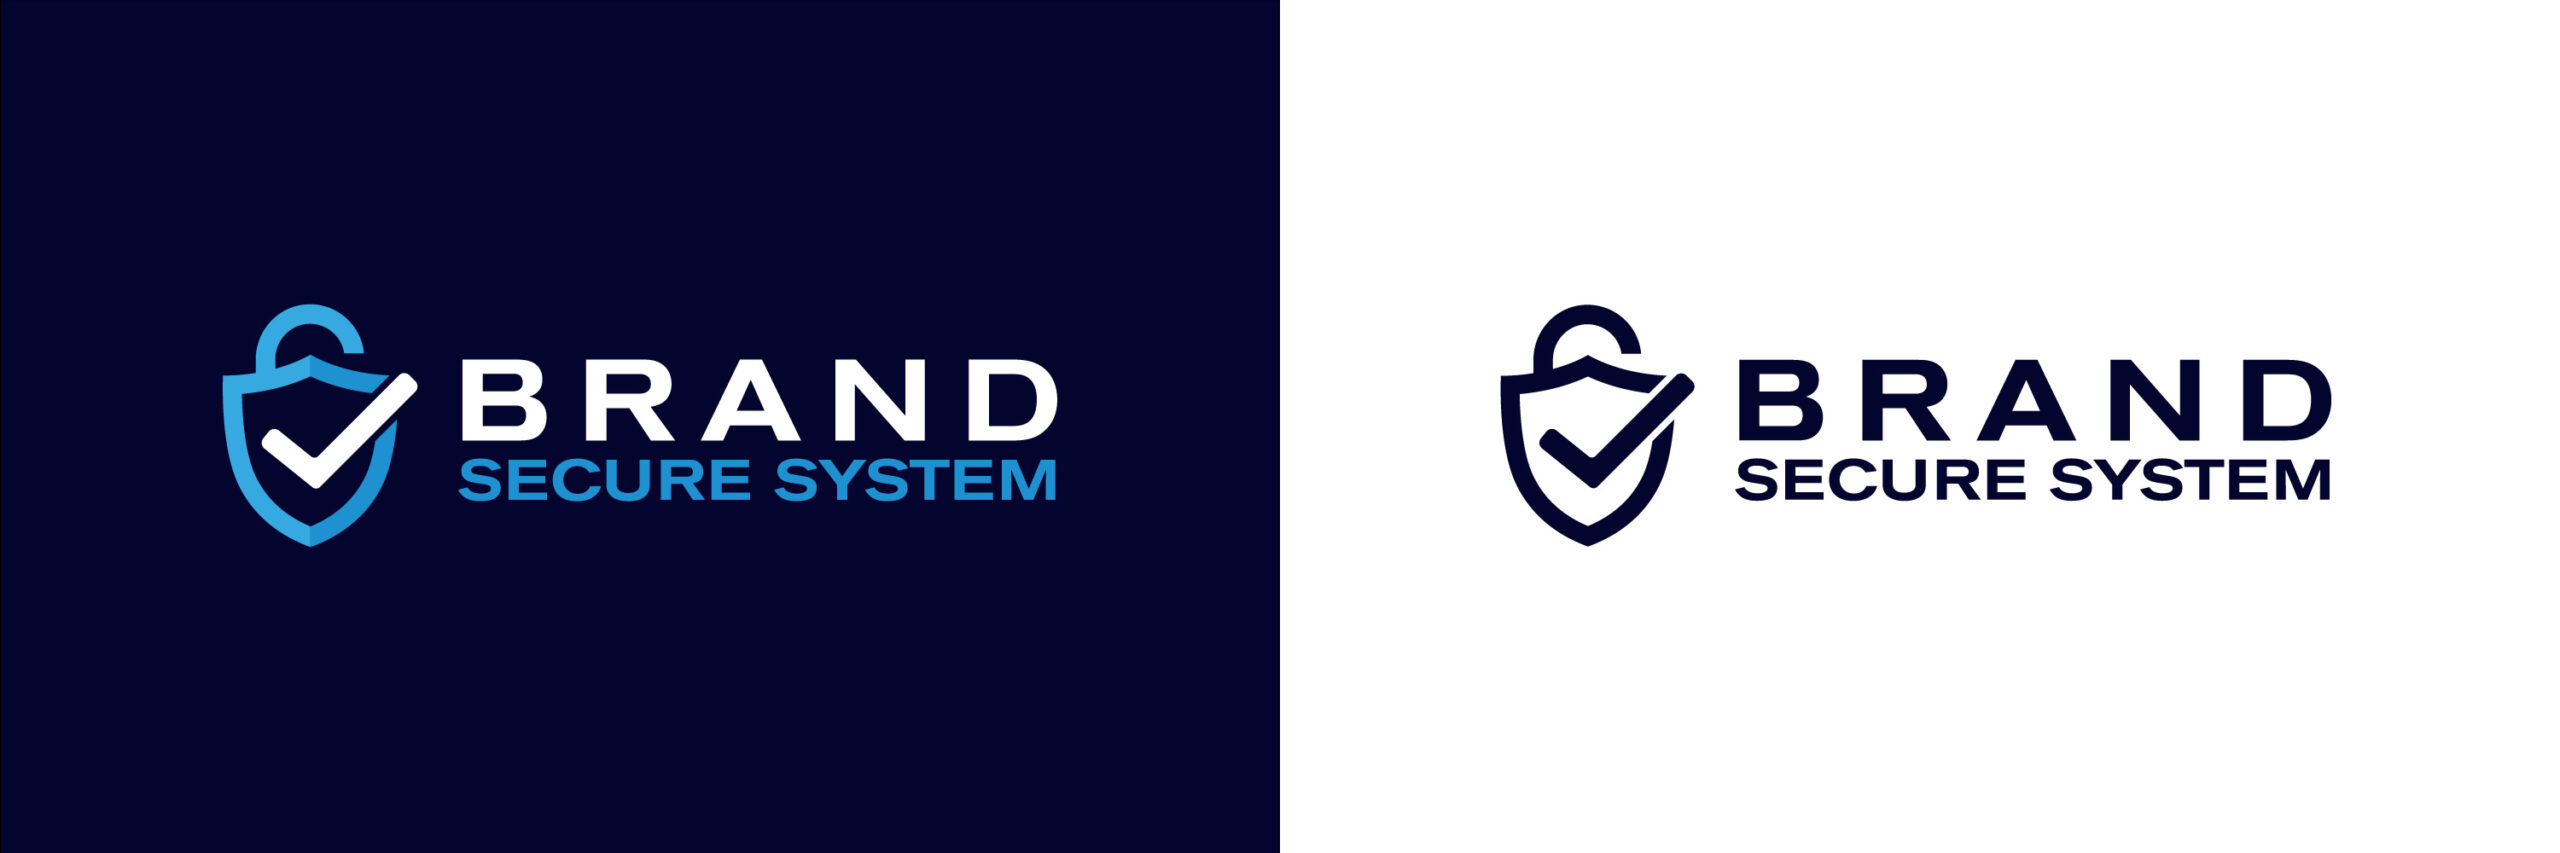 Brand Secure System